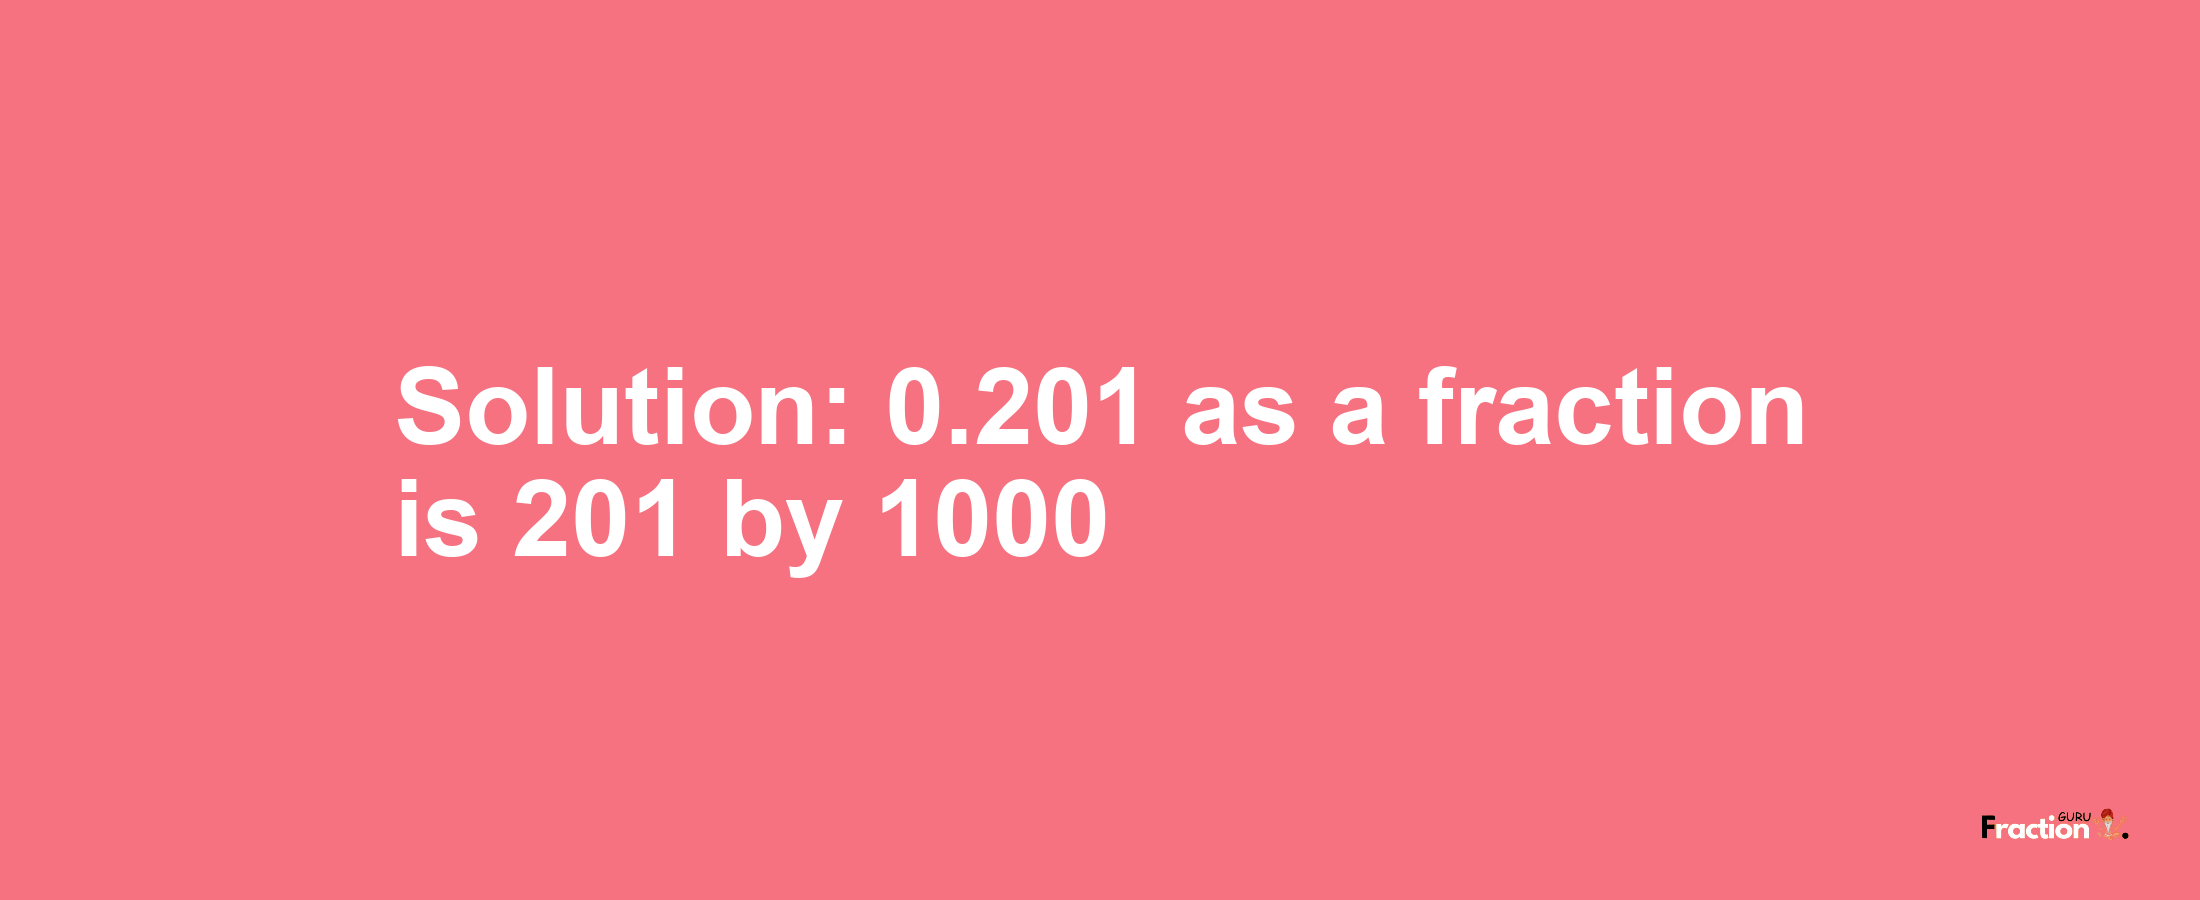 Solution:0.201 as a fraction is 201/1000